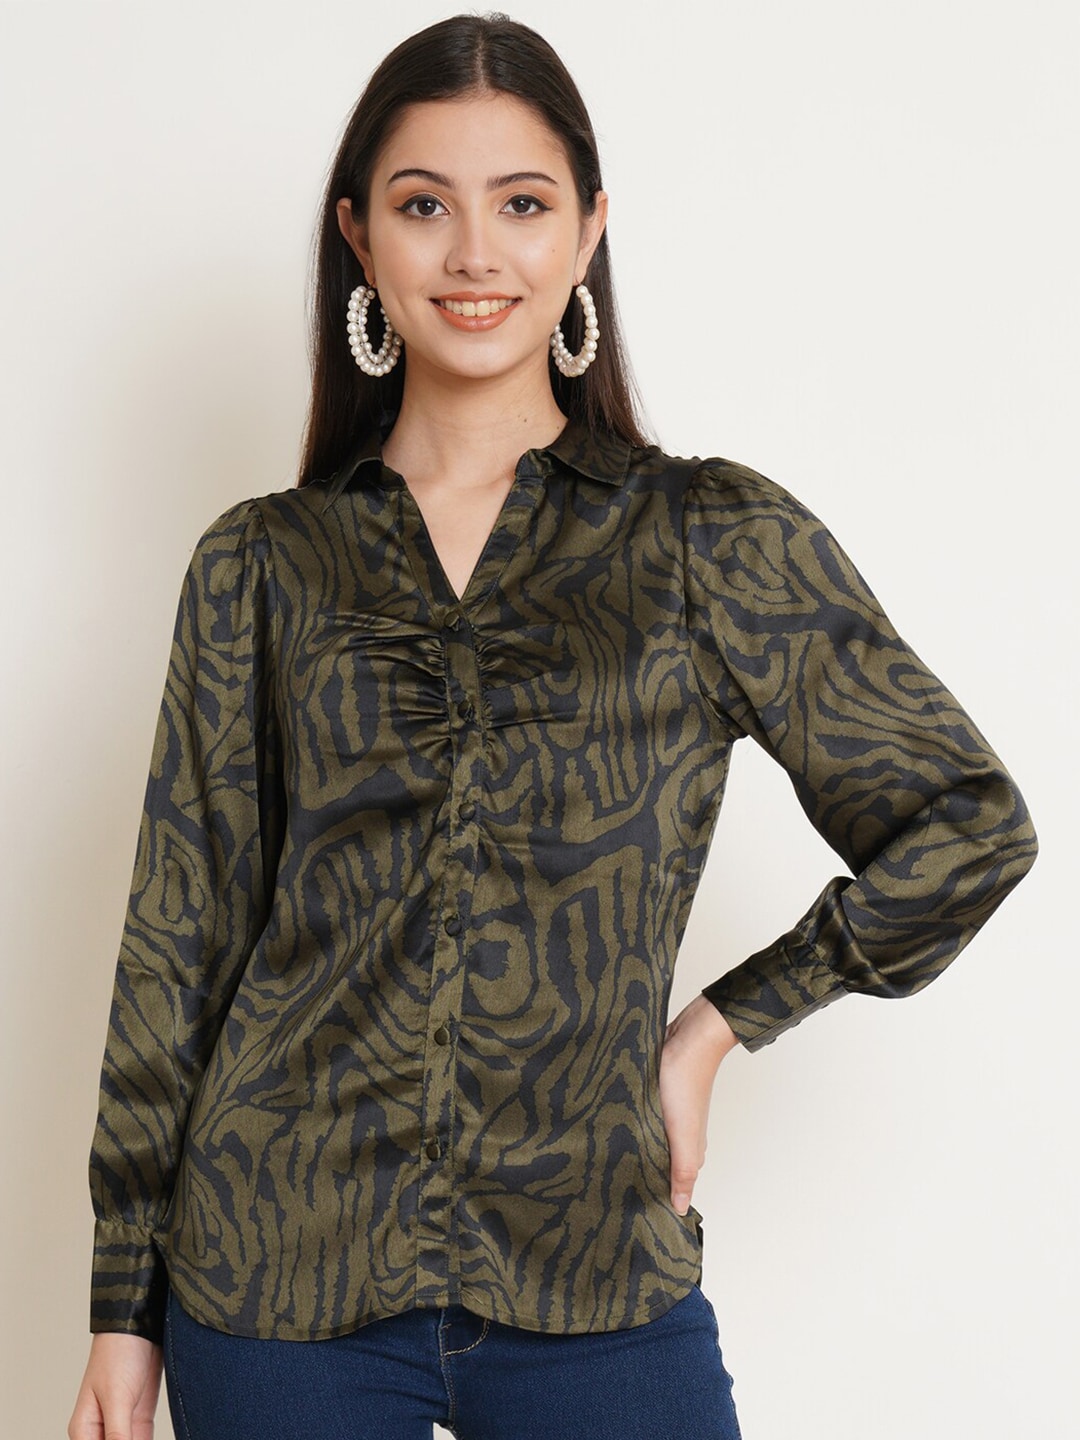 IX IMPRESSION Women Black & Olive Green Animal Print Long Sleeves Satin Shirt Style Top Price in India